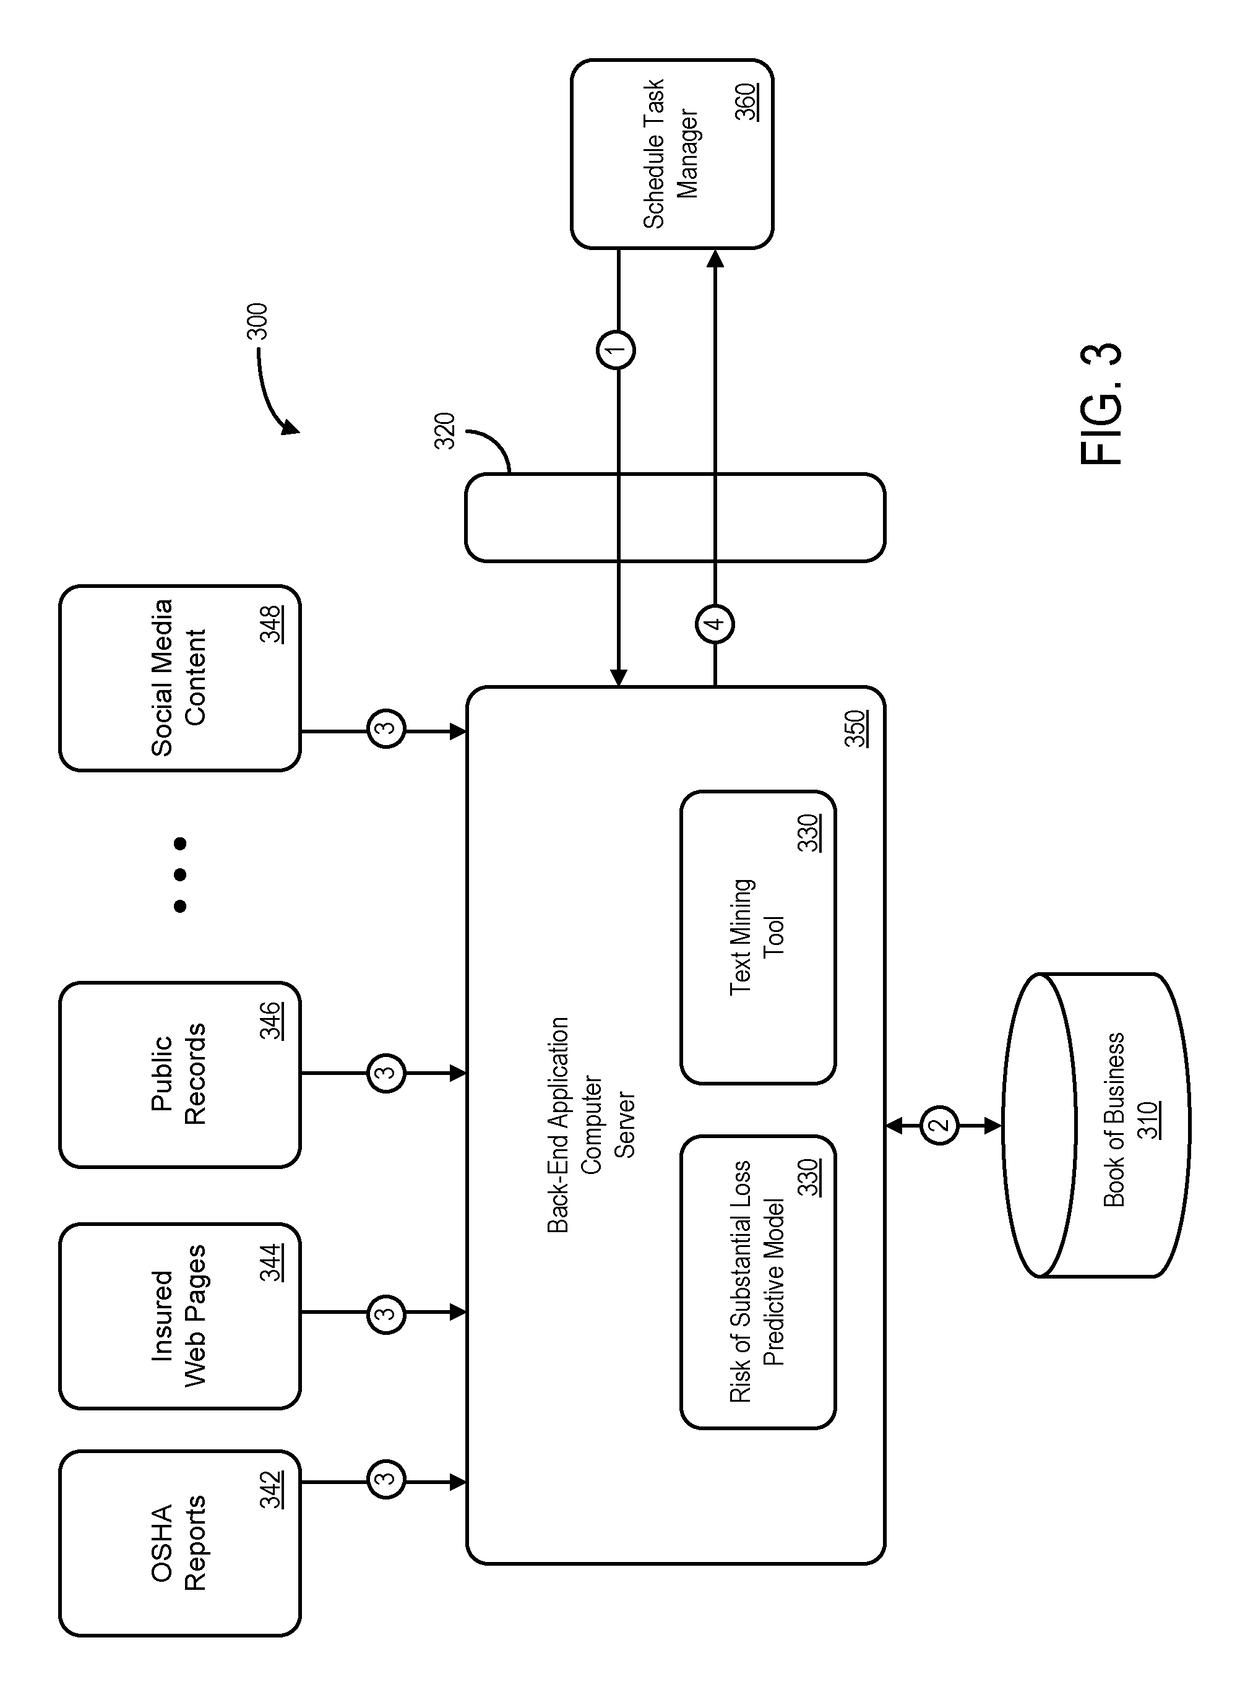 Processing system for data elements received via source inputs